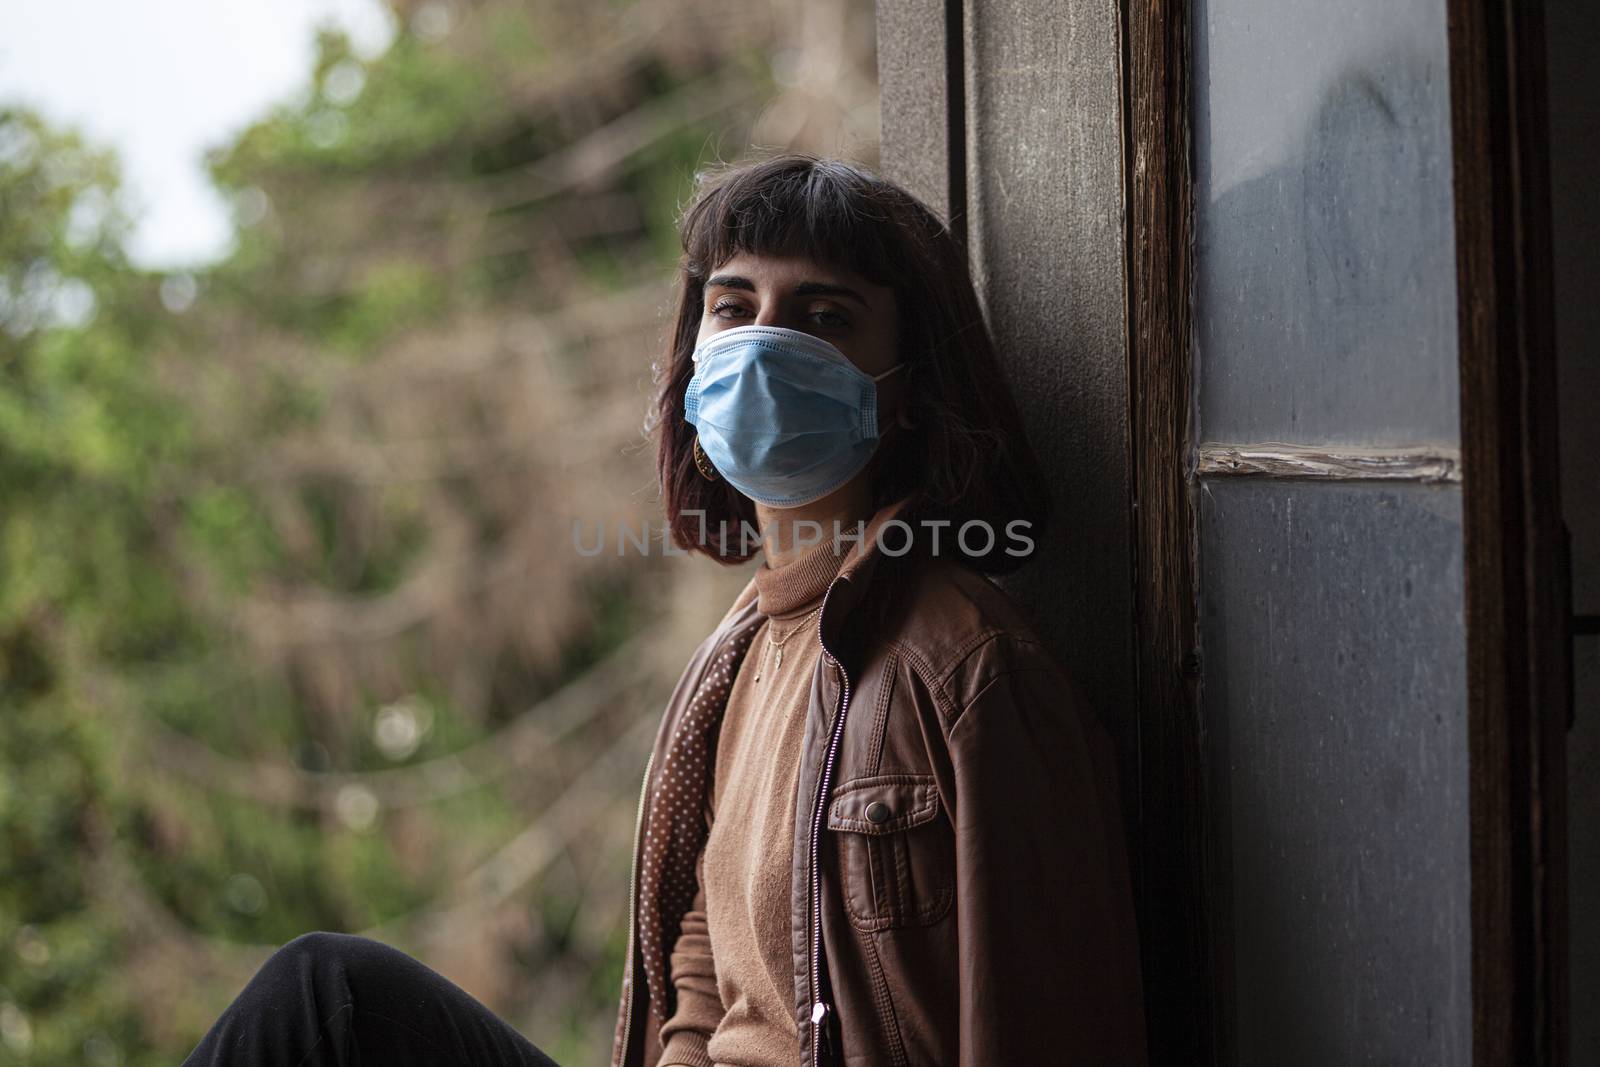 Girl with medical mask at window in her home during covid quarantine period